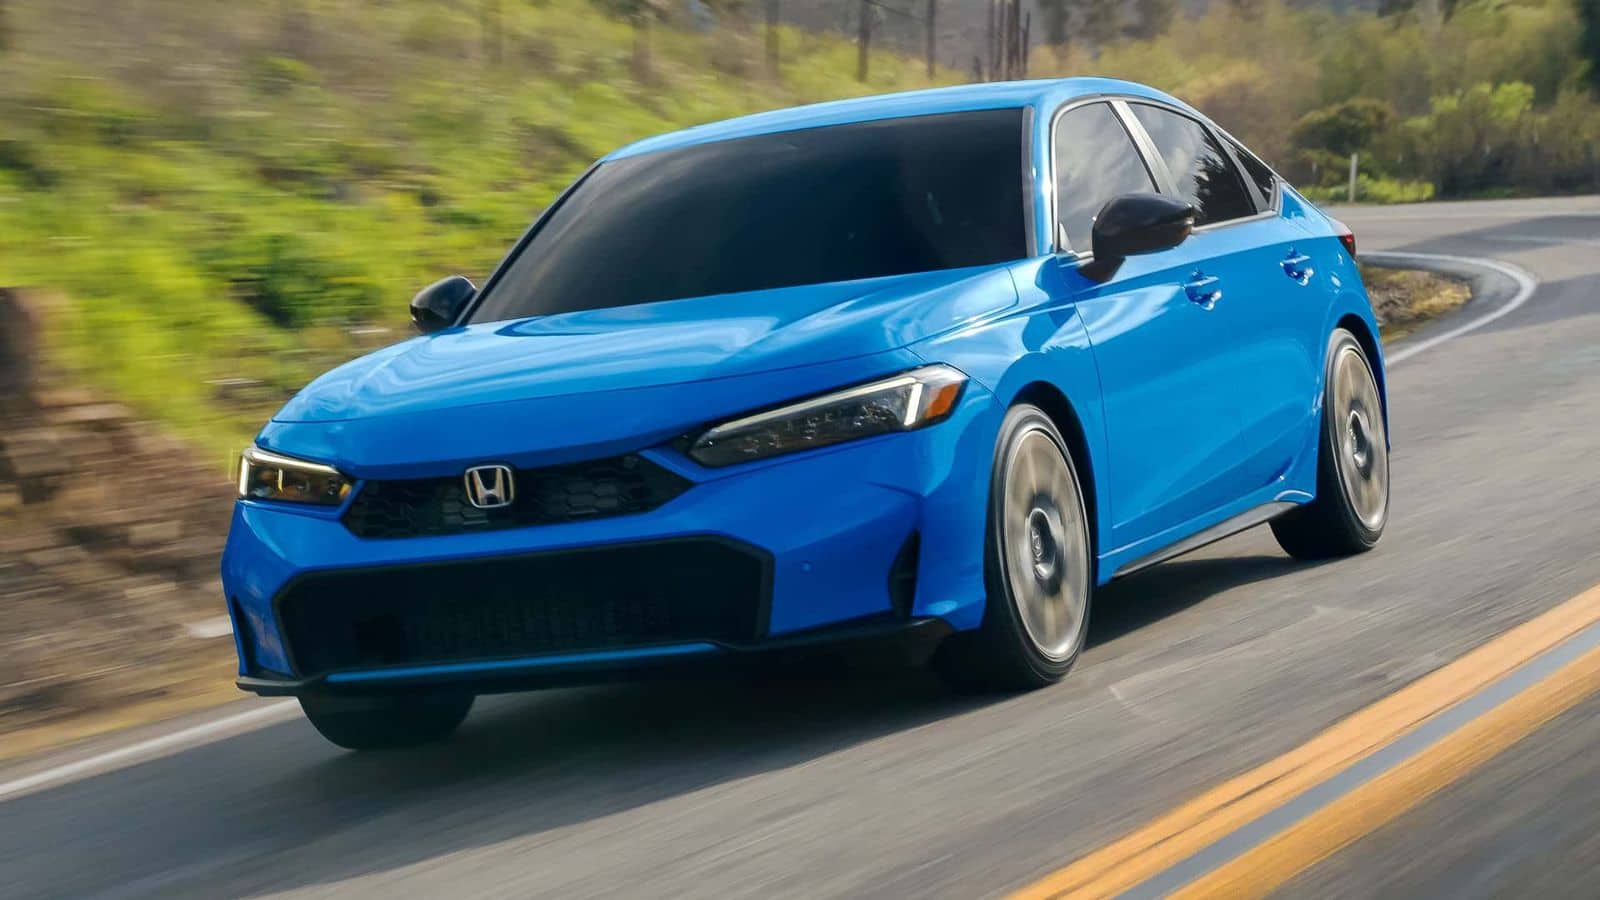 2025 Honda Civic goes official with new features, hybrid powertrain